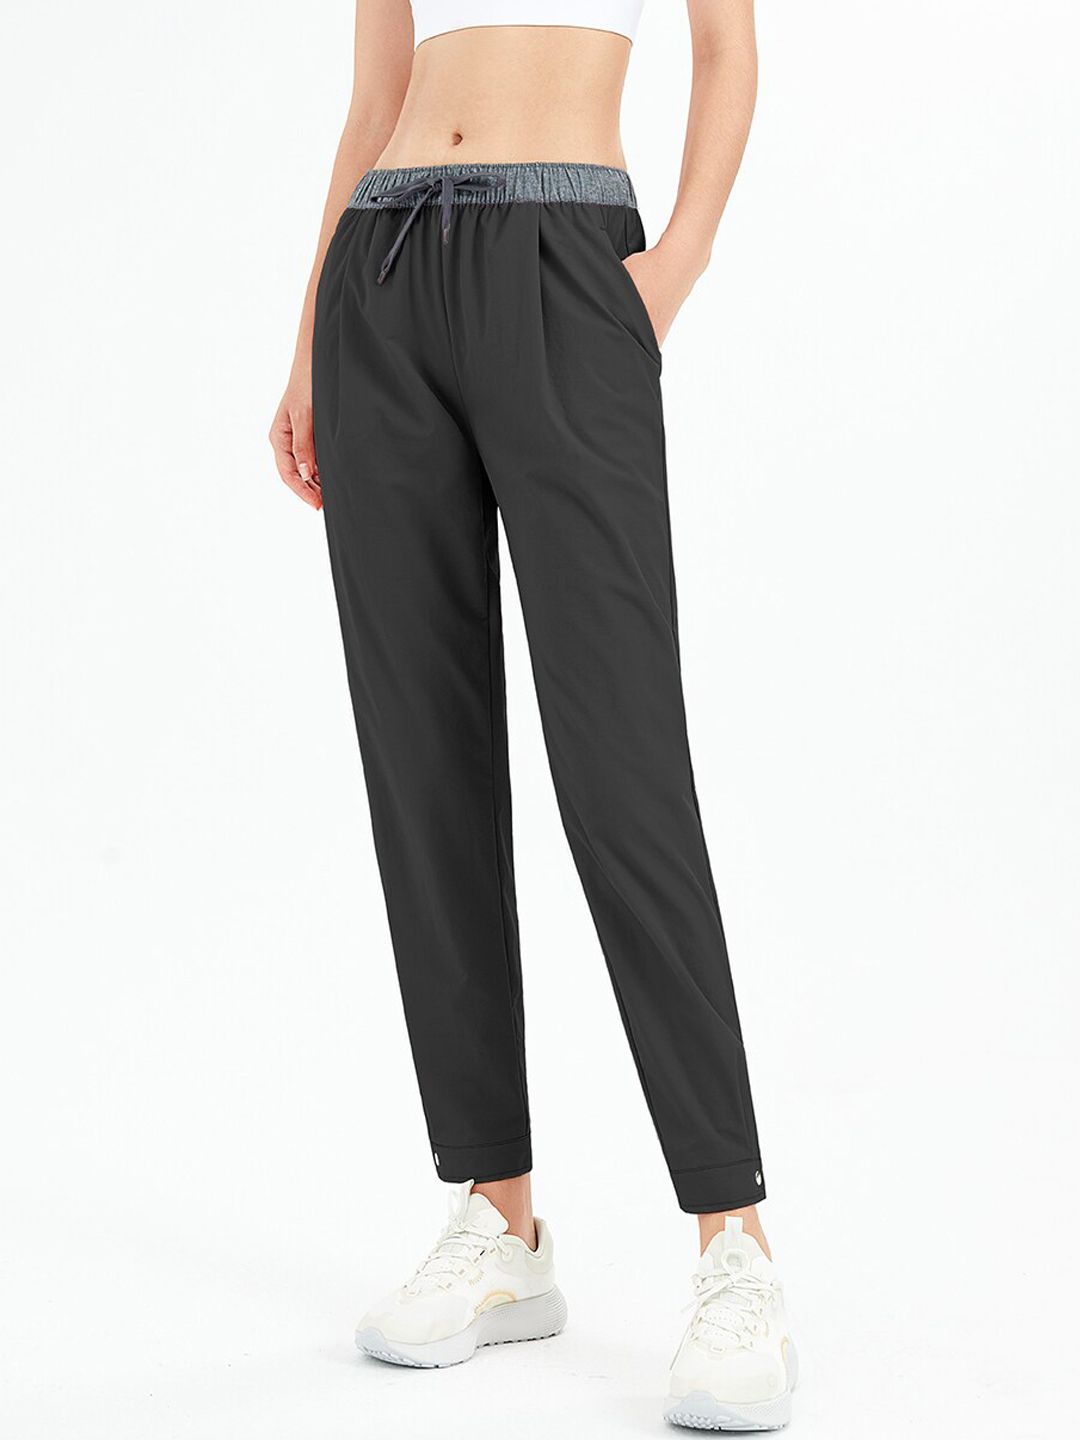 JC Collection Women Black Solid Track Pants Price in India